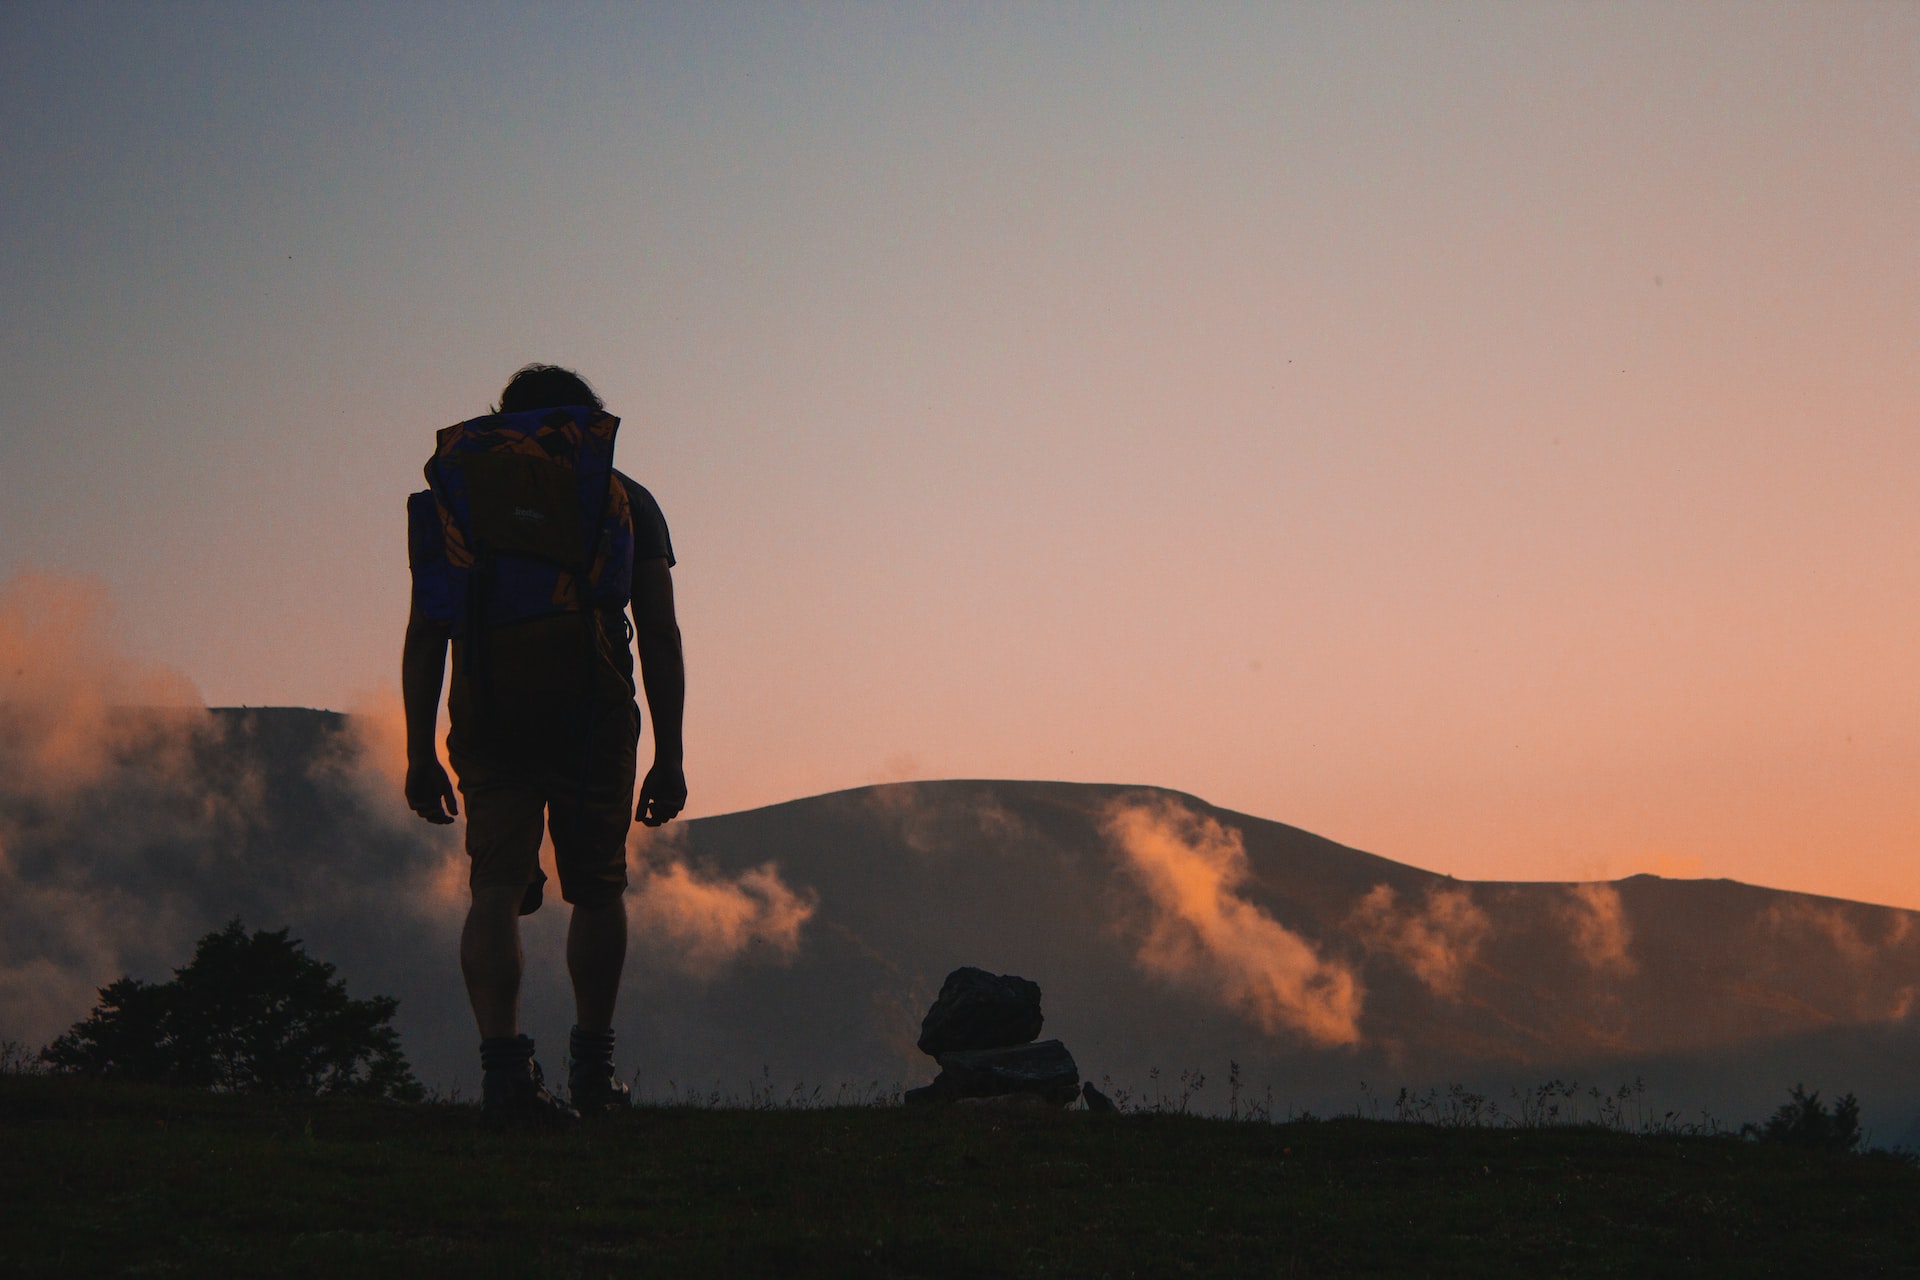 A backpack or on a mountaintop silhouetted by the setting sun.